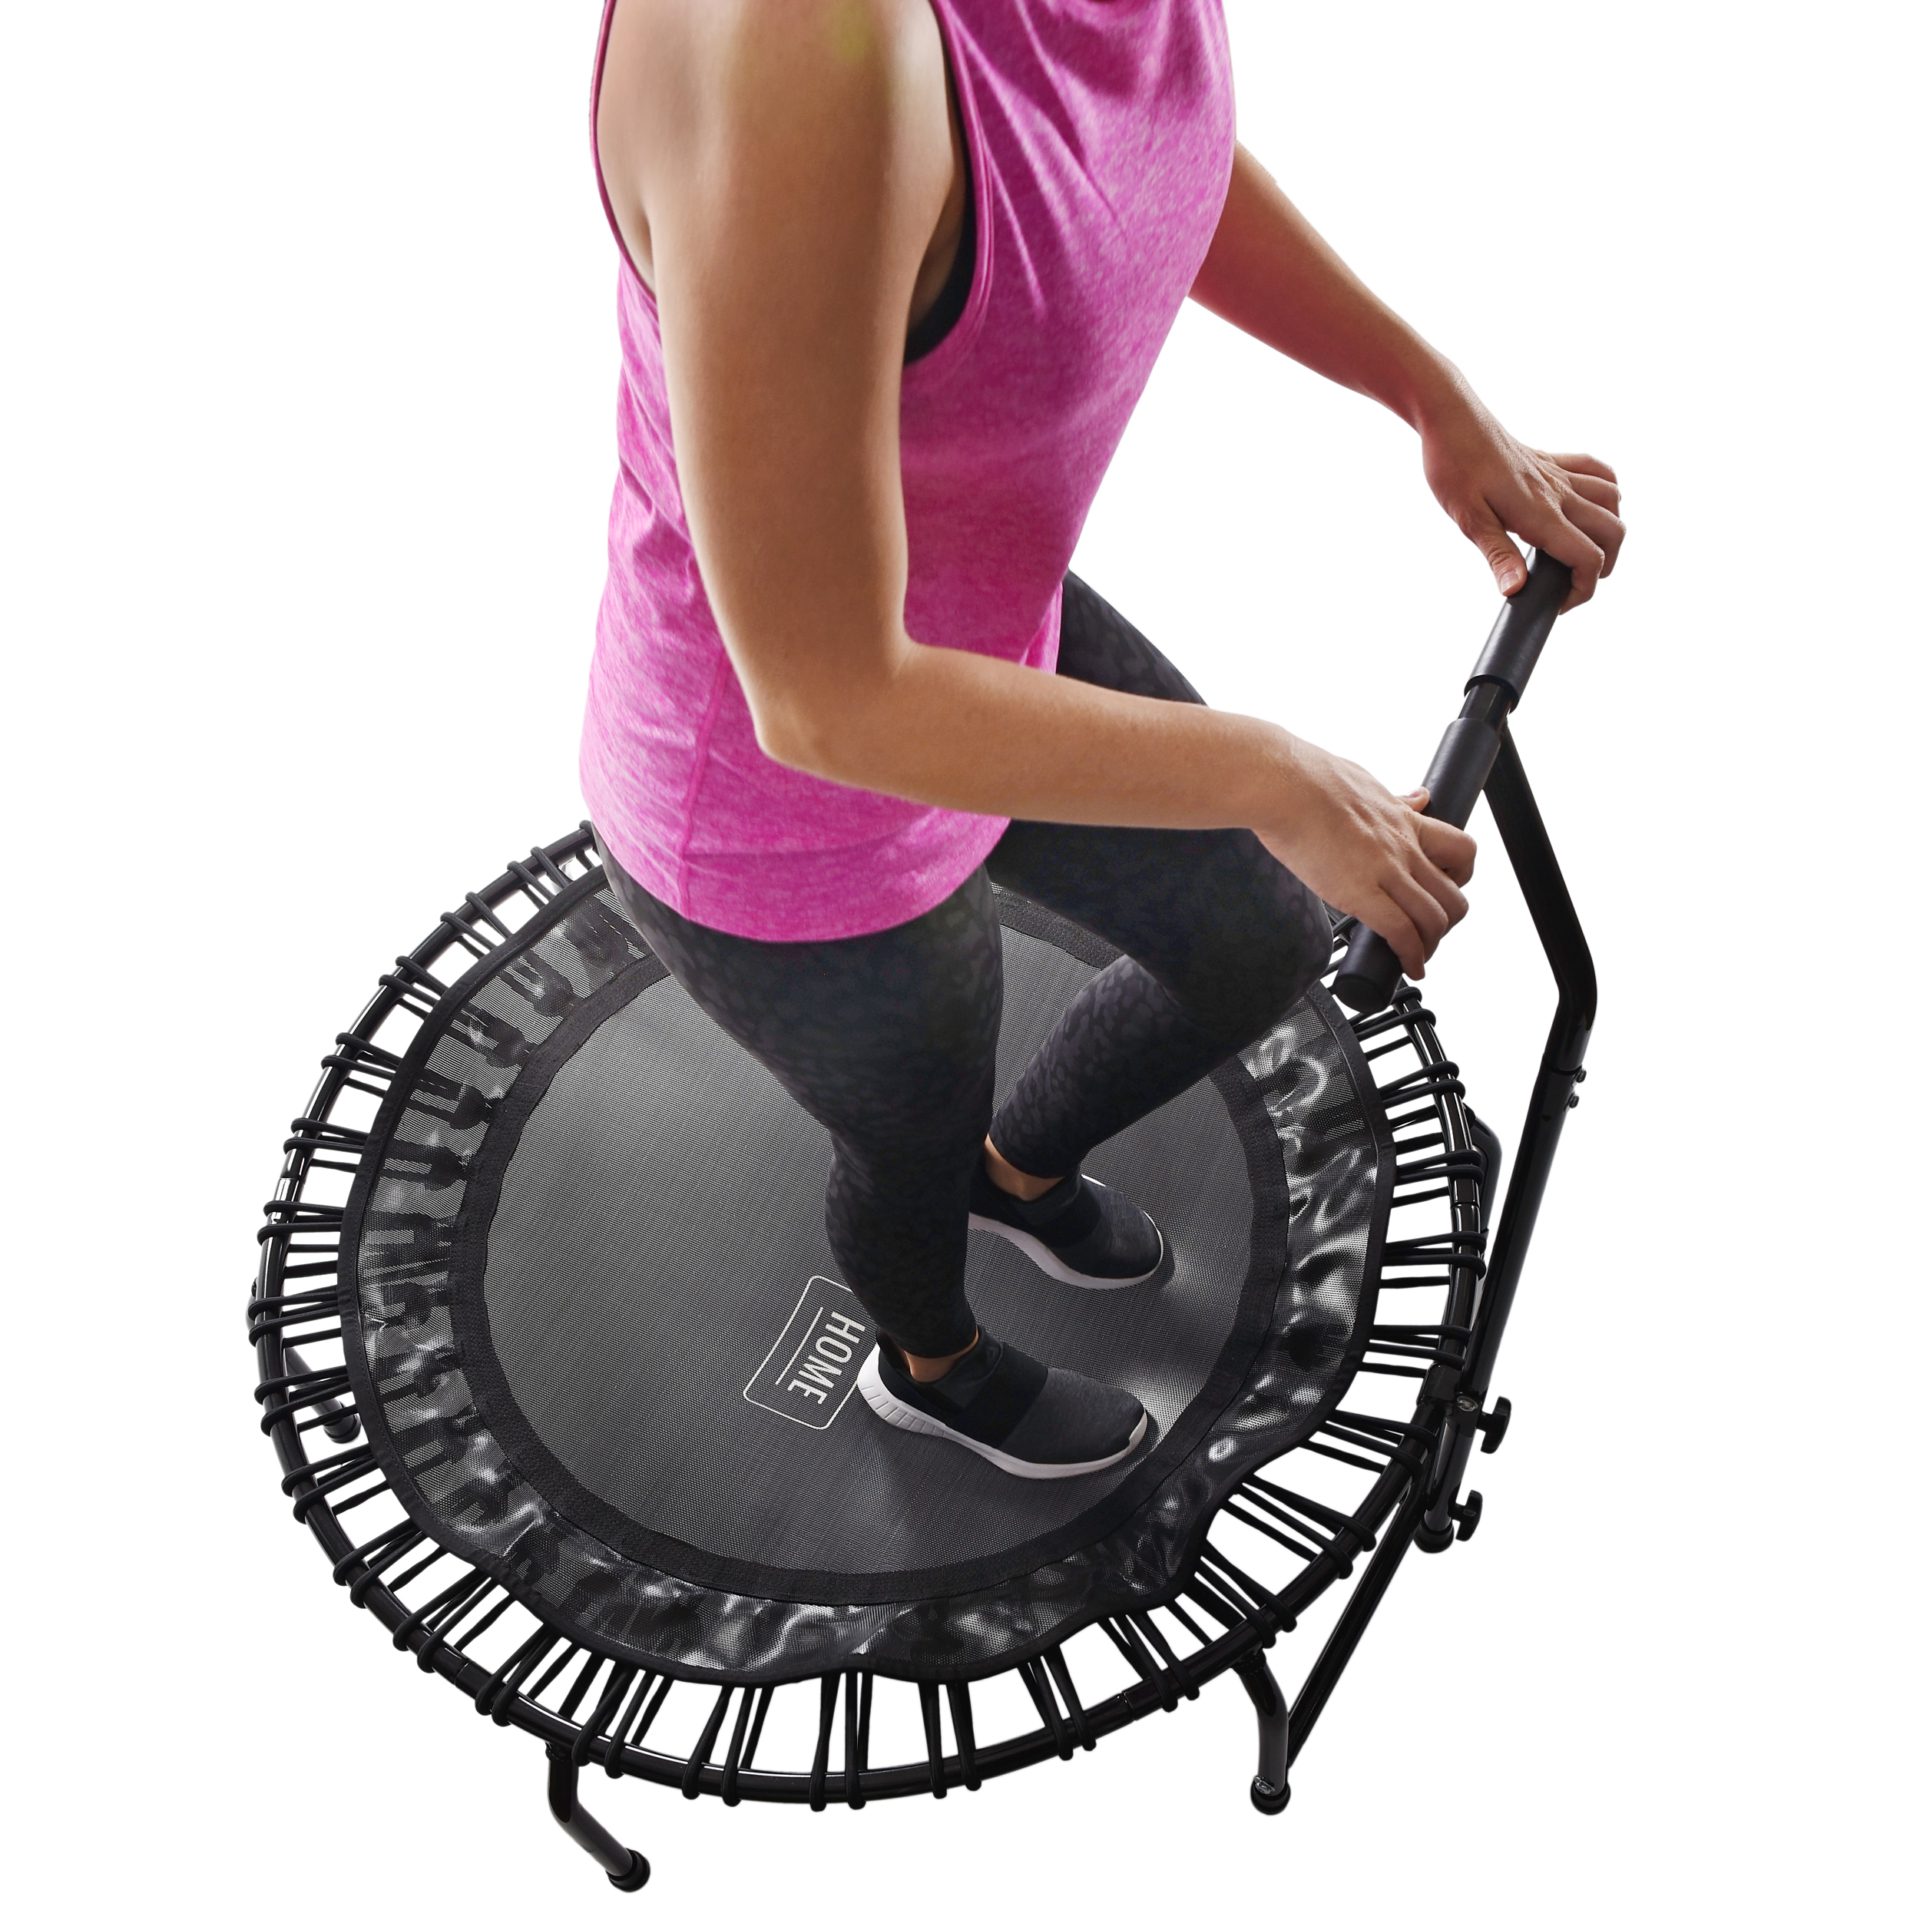 Jumpsport Home 120 Fitness Trampoline Stamina Products